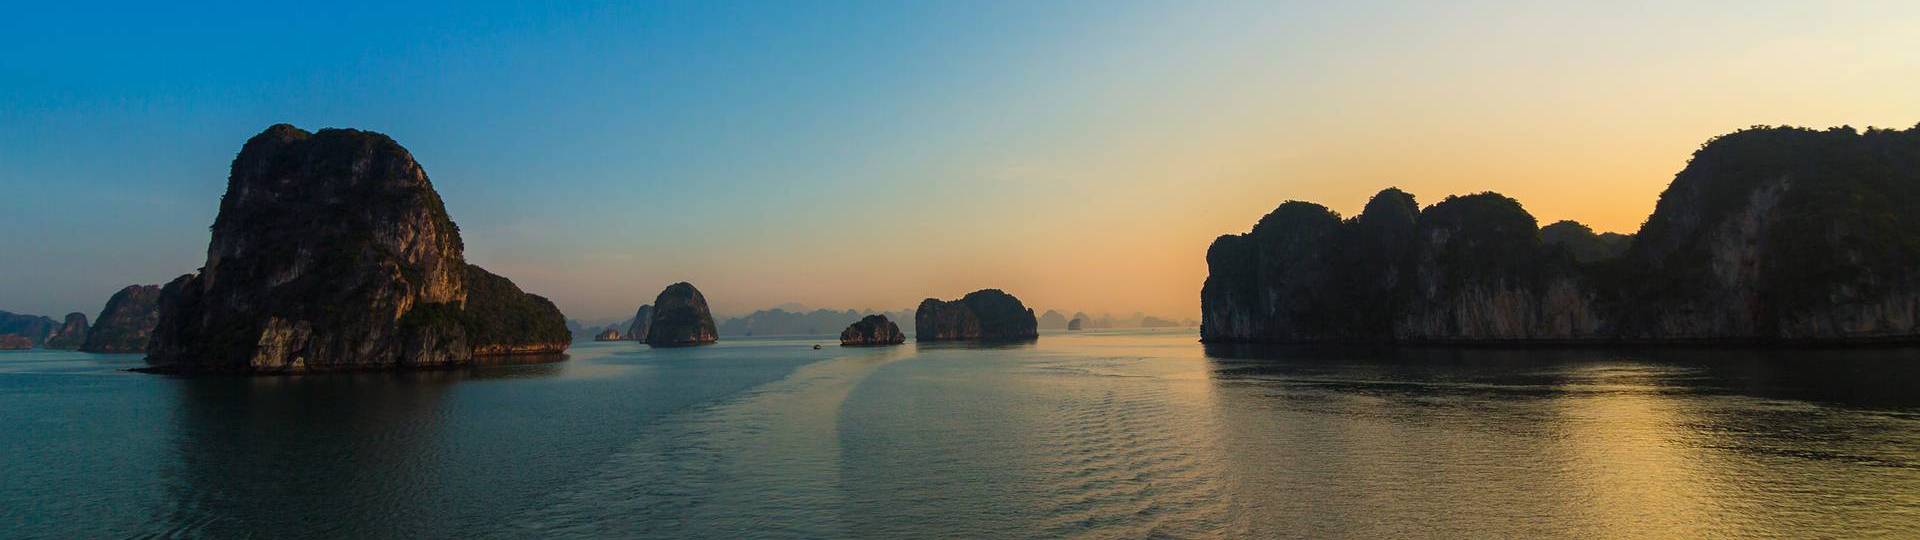 05 lovely destinations to combine with Lan Ha bay & Halong Bay